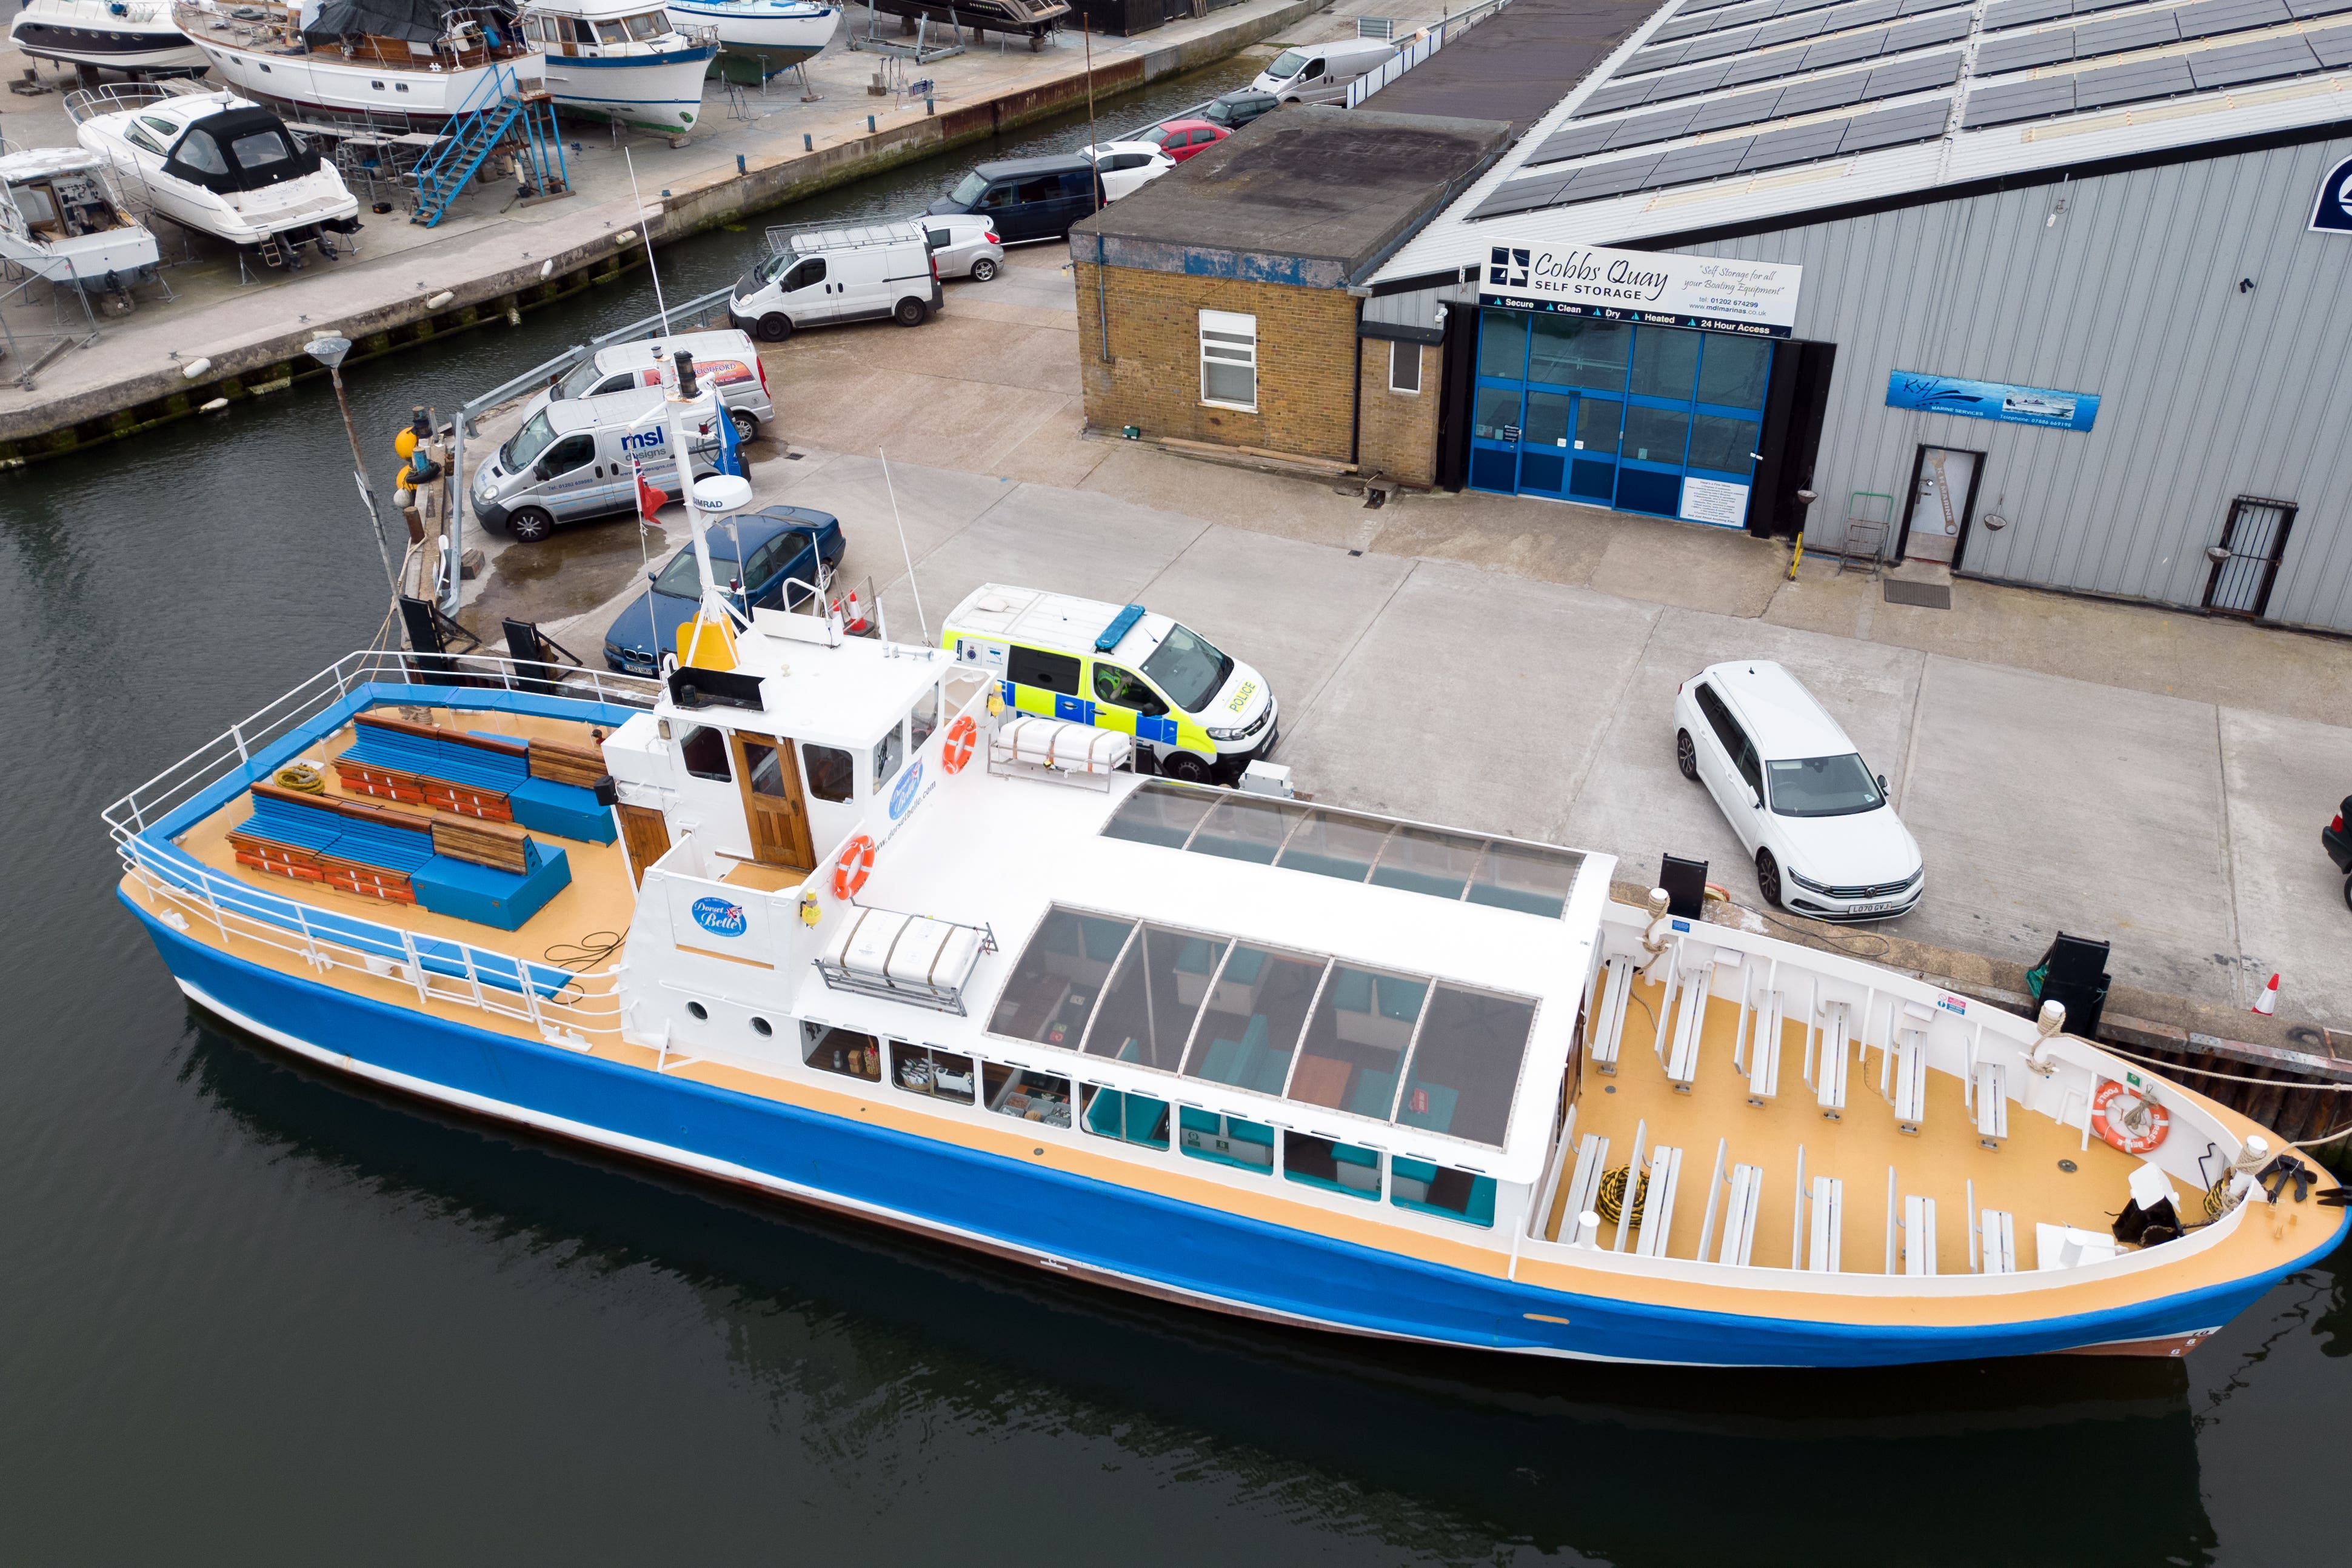 A cruise boat called the Dorset Belle was impounded at Cobb’s Quay Marina in Poole, Dorset following the incident off Bournemouth beach